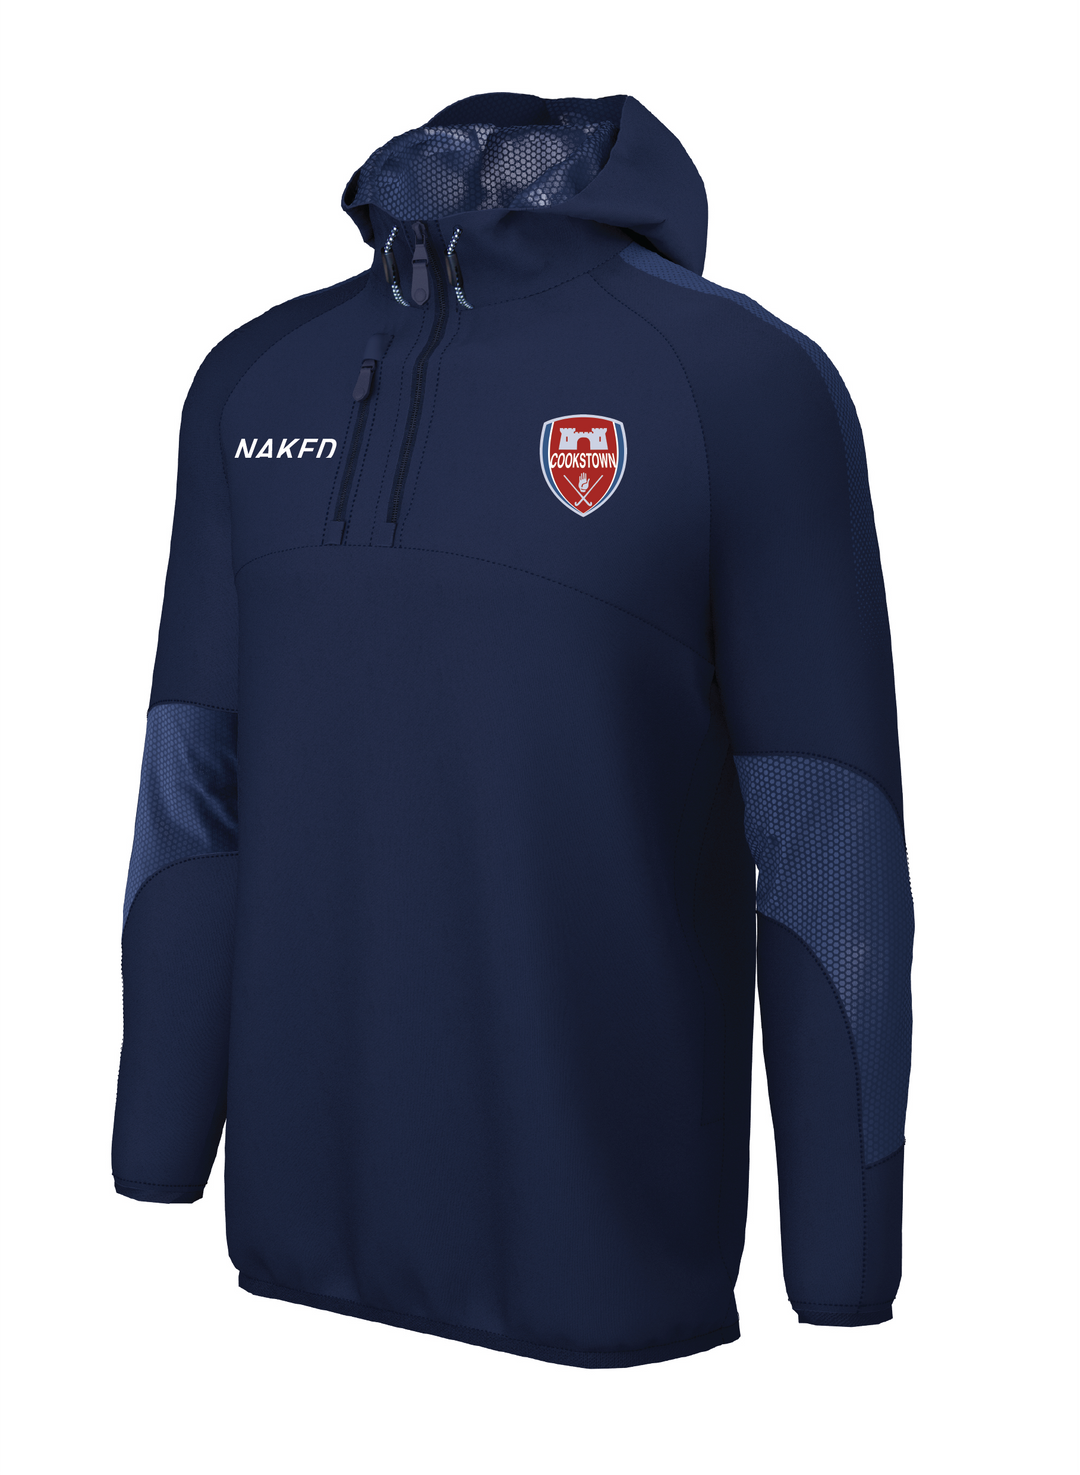 Cookstown Youth 1/4 Zip Jacket